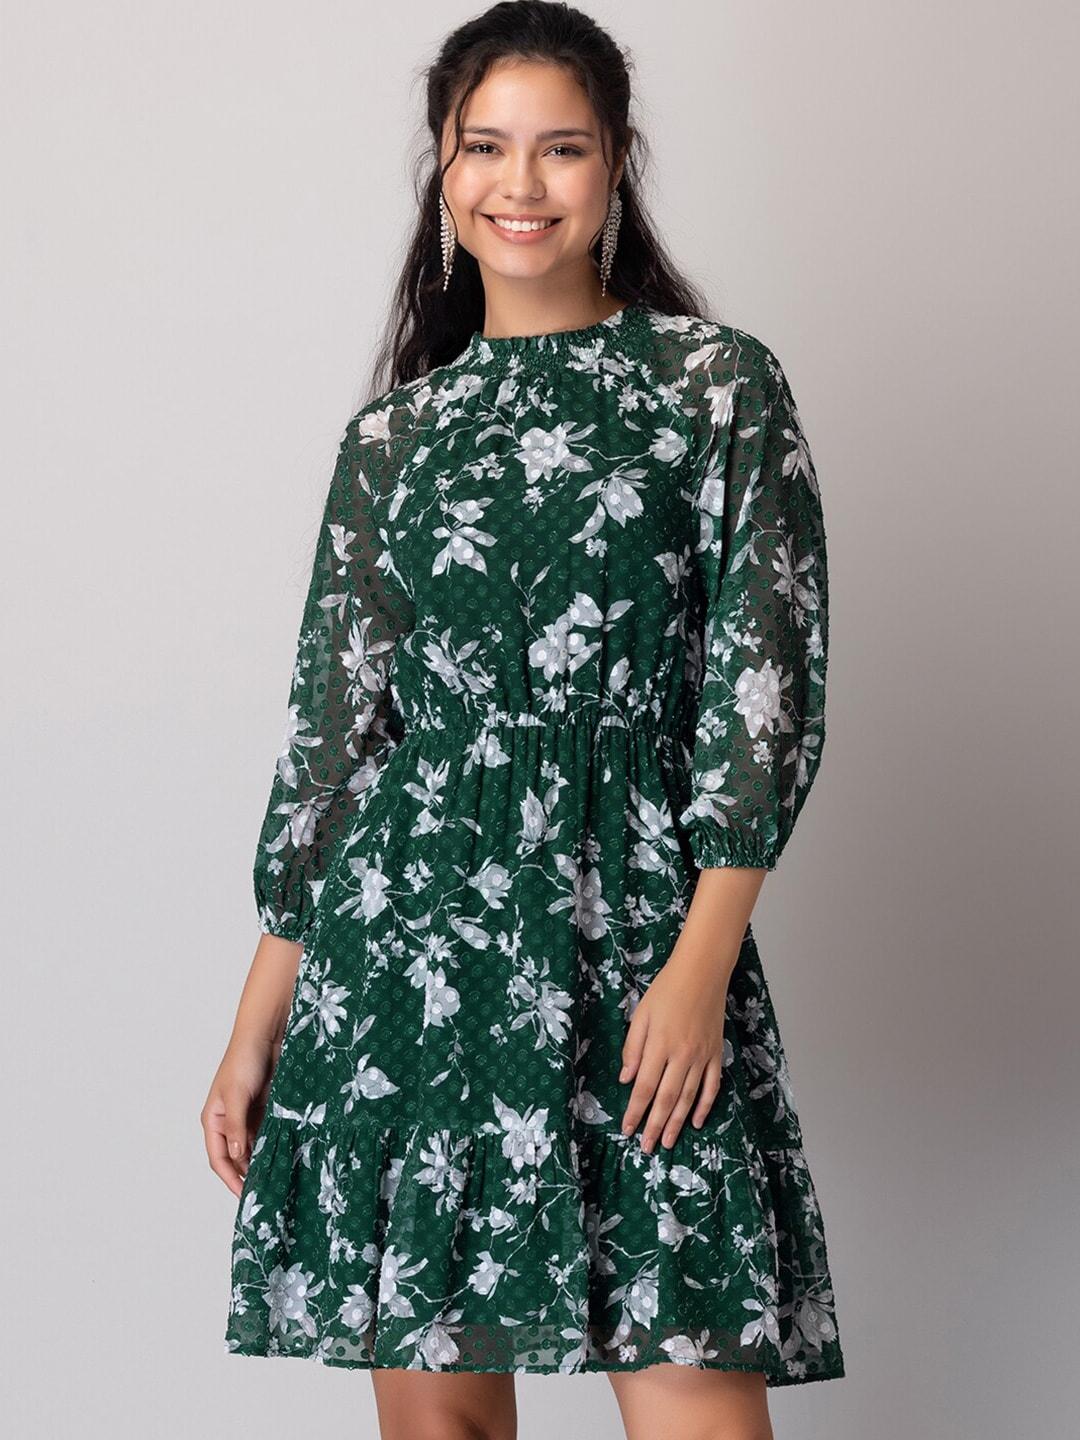 FabAlley Green Floral Printed High Neck Smocked Detail Fit & Flare Dress